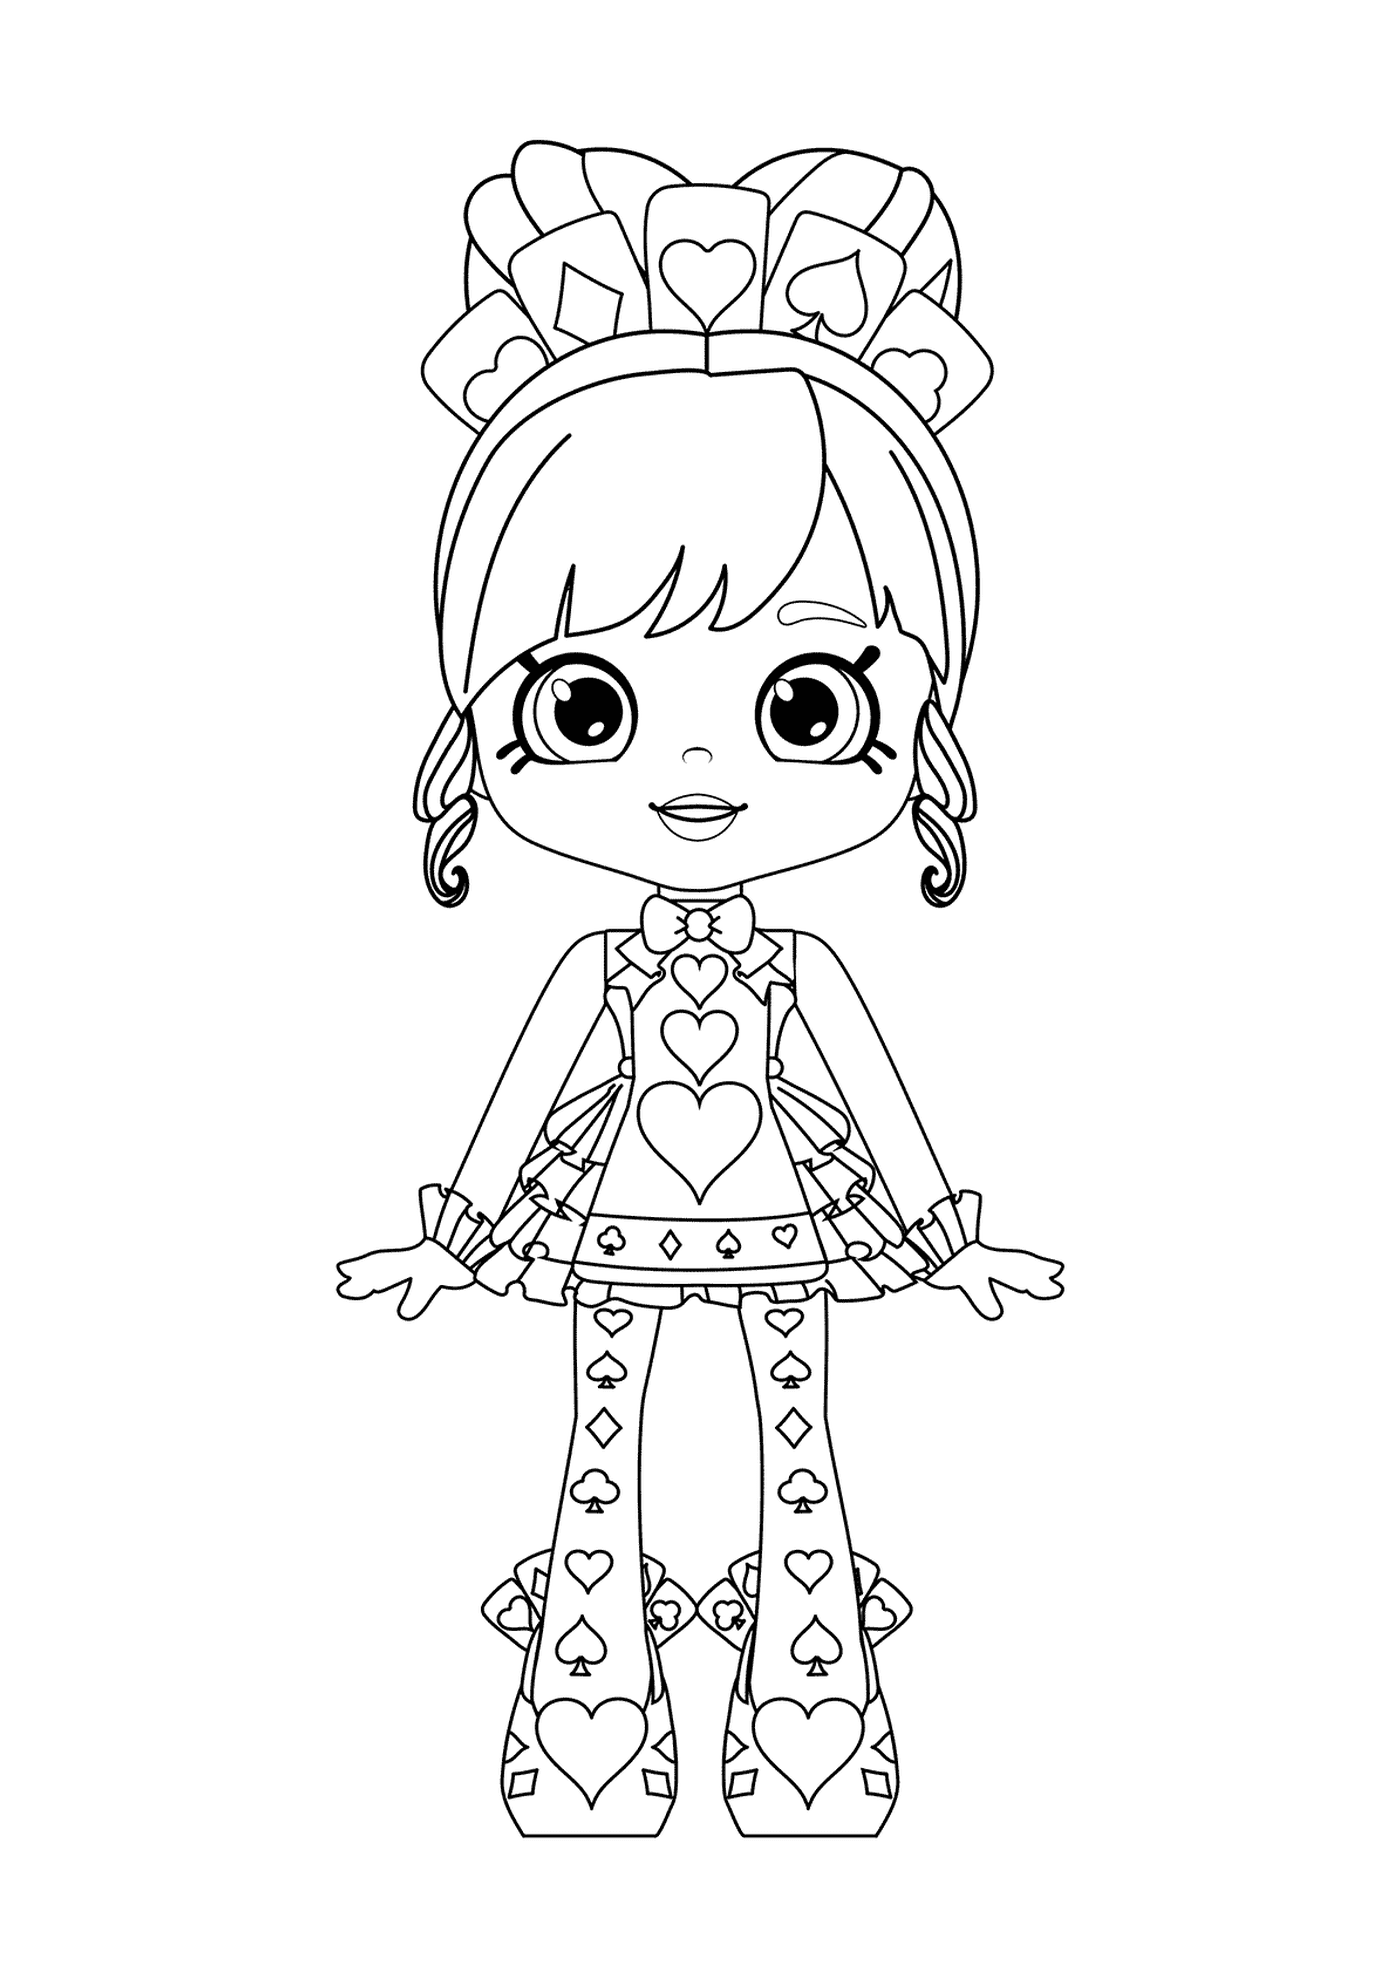  The Queen of the Hearts of Shopkins 